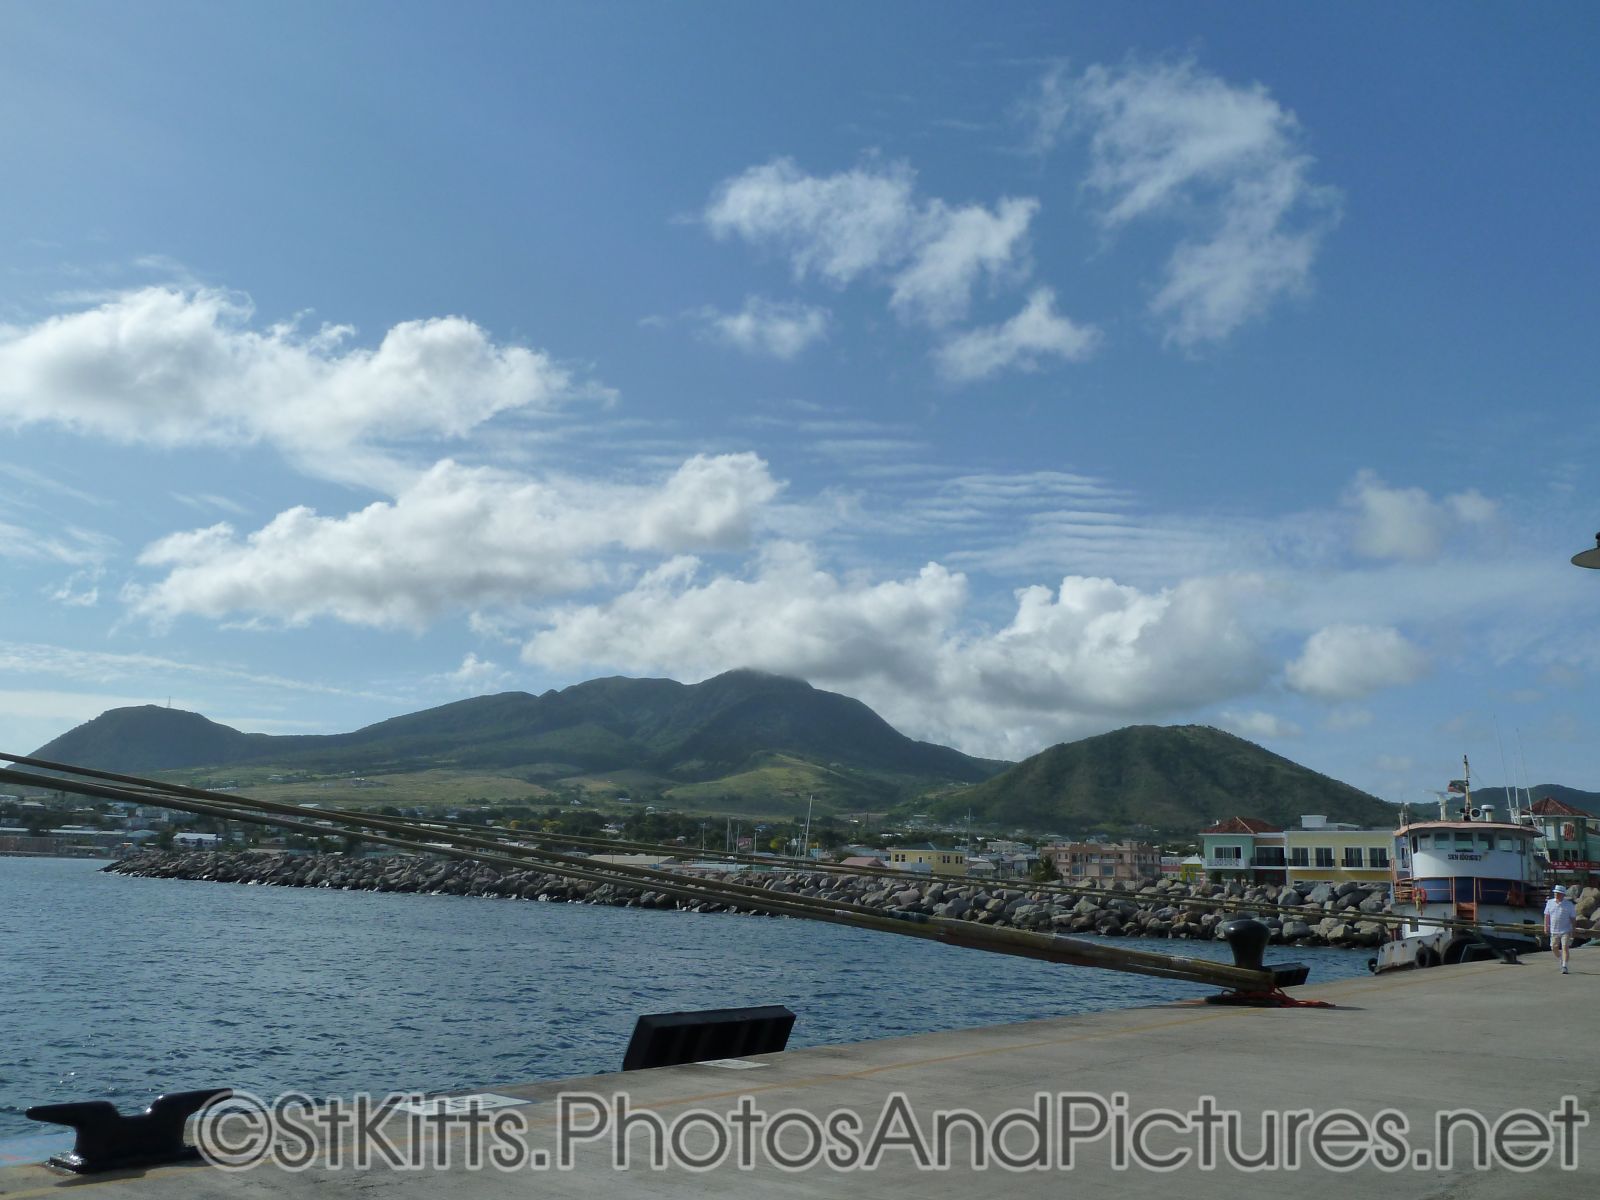 Lush green hills and mountains as viewed from St Kitts Cruise Port.jpg
